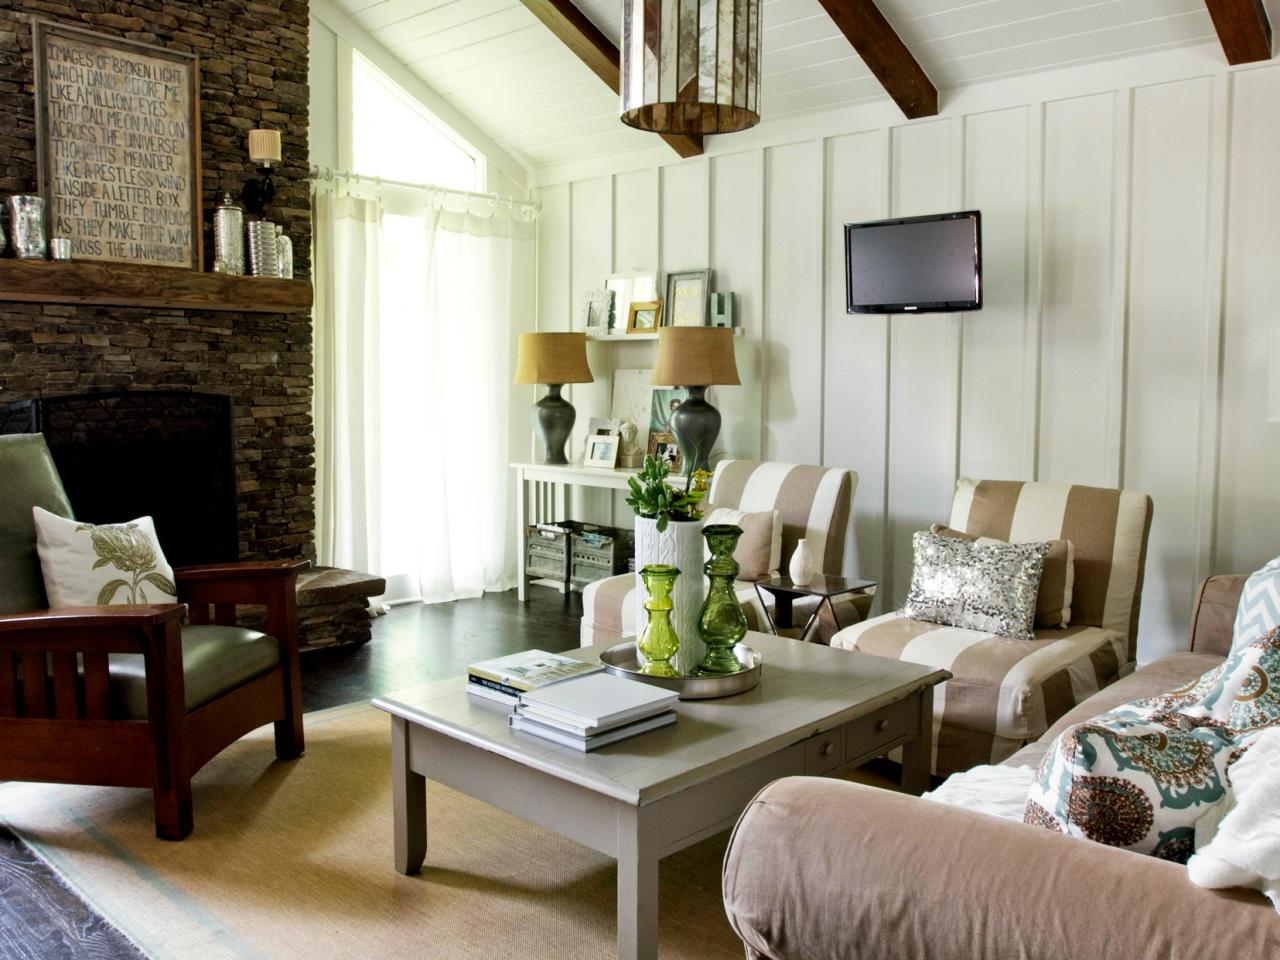 cottage ideas for a living room